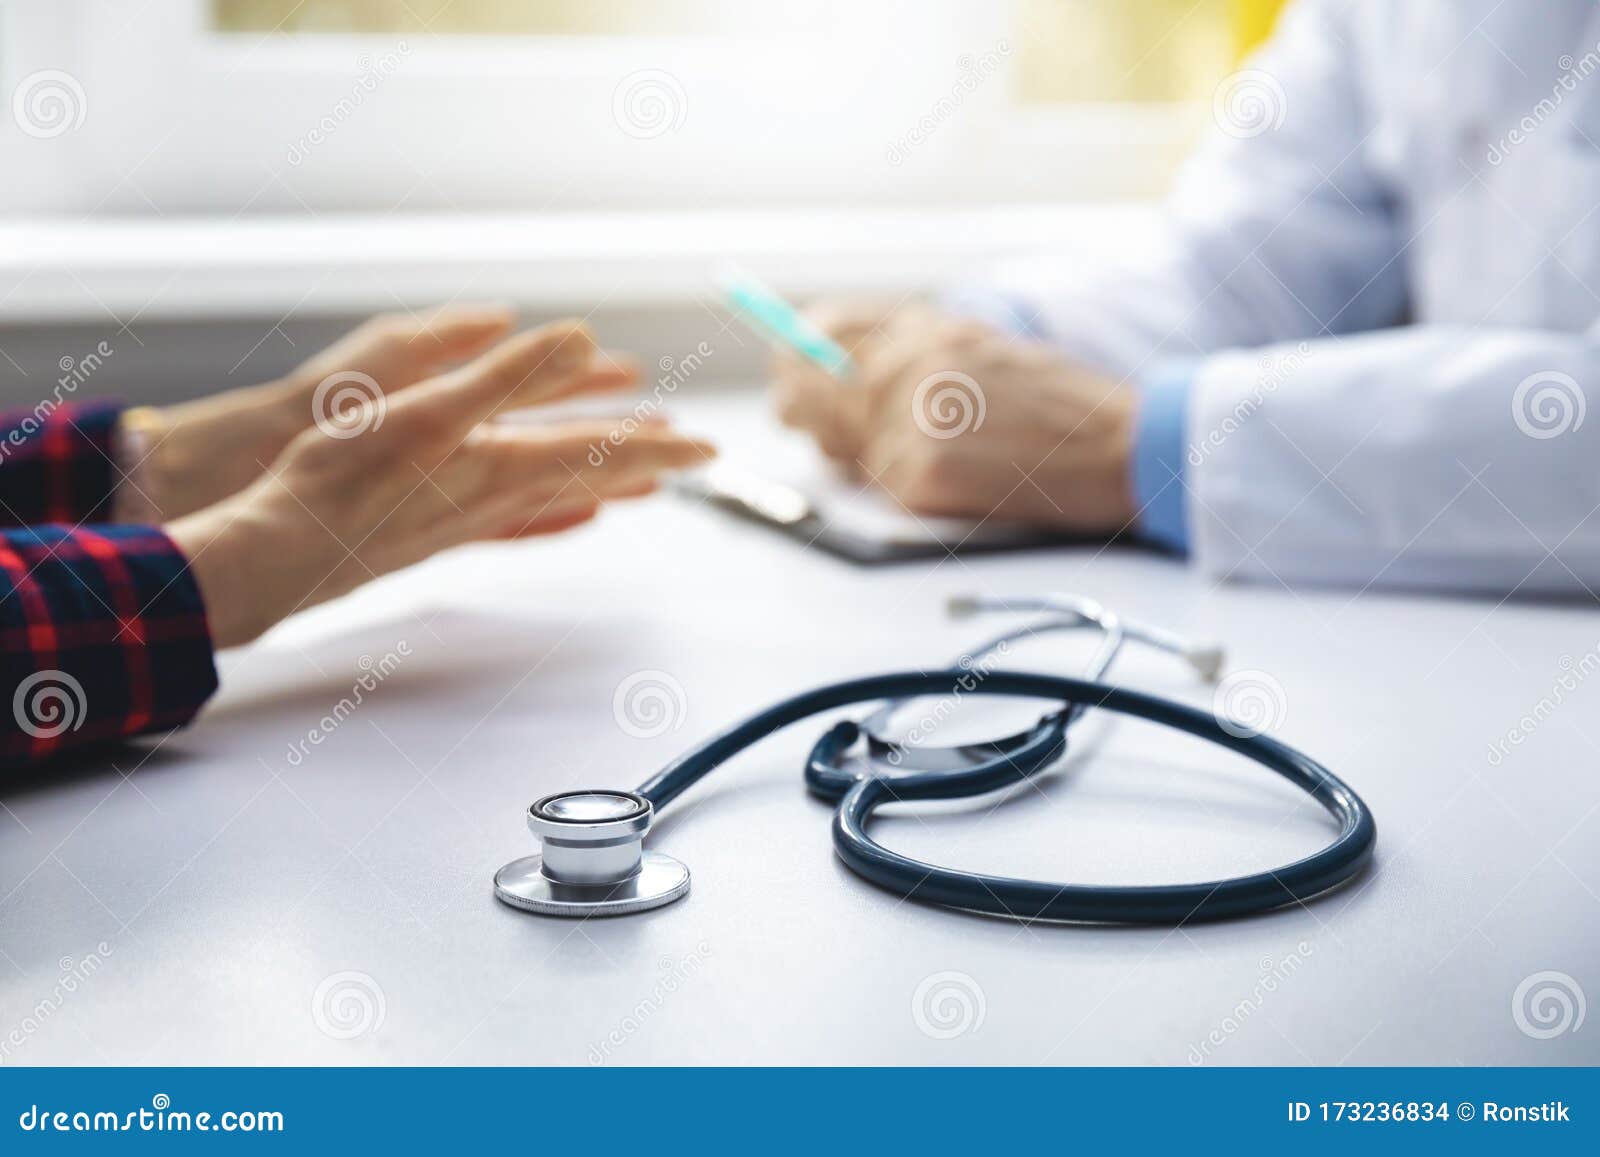 medical consultation - doctor talking to patient in clinic office